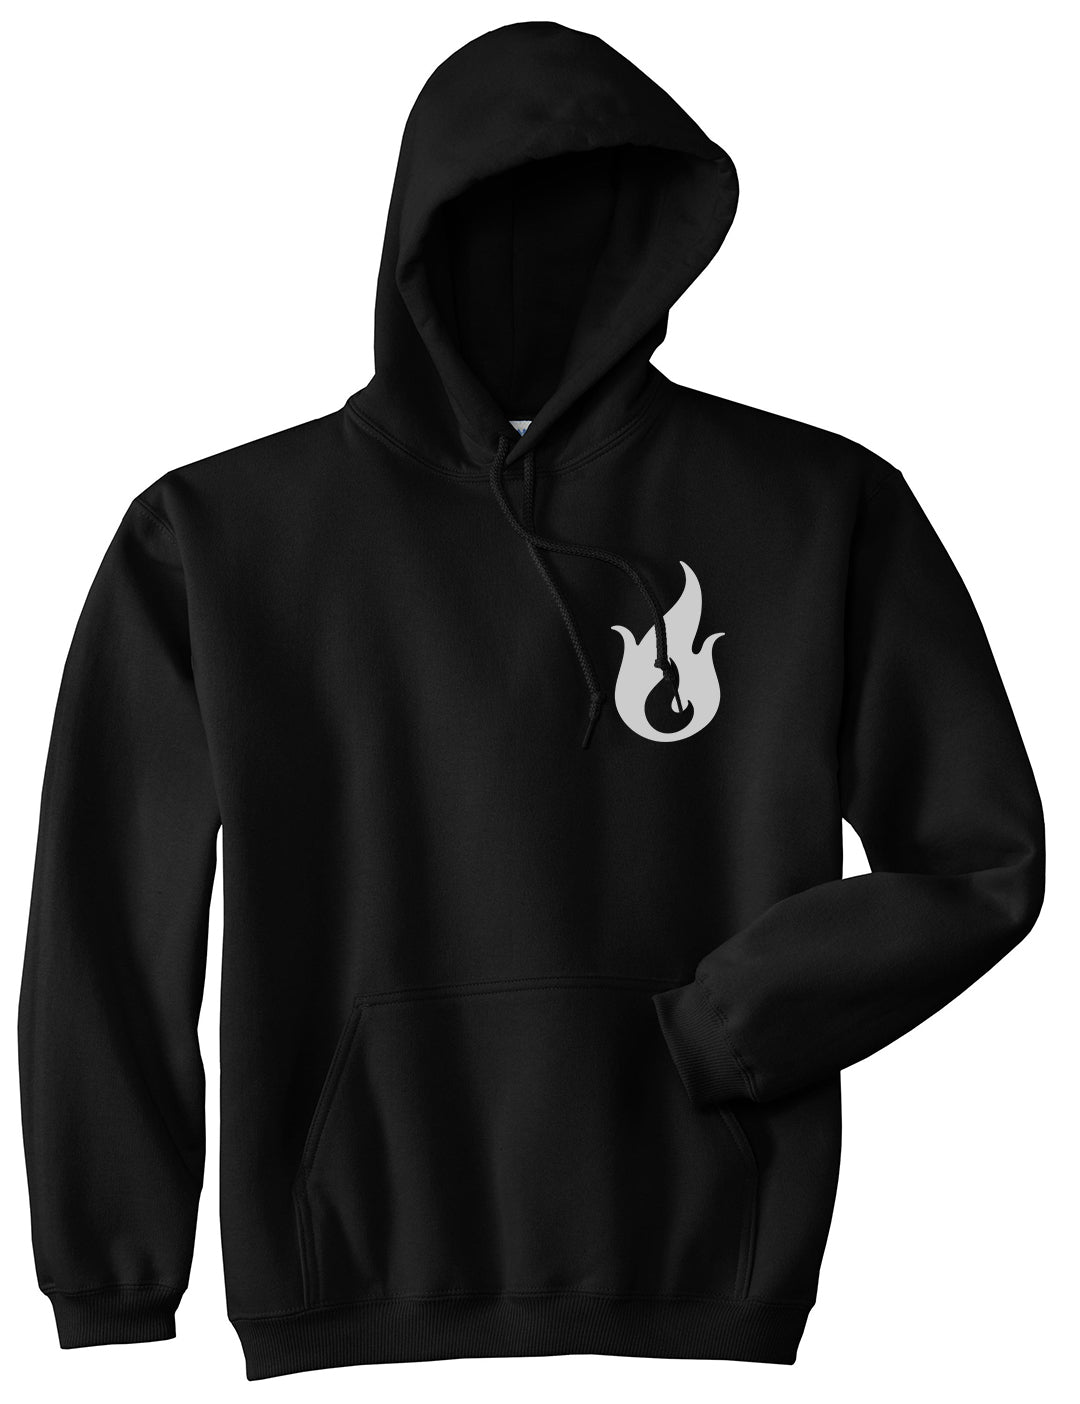 Fire Emoji Chest Mens Black Pullover Hoodie by KINGS OF NY